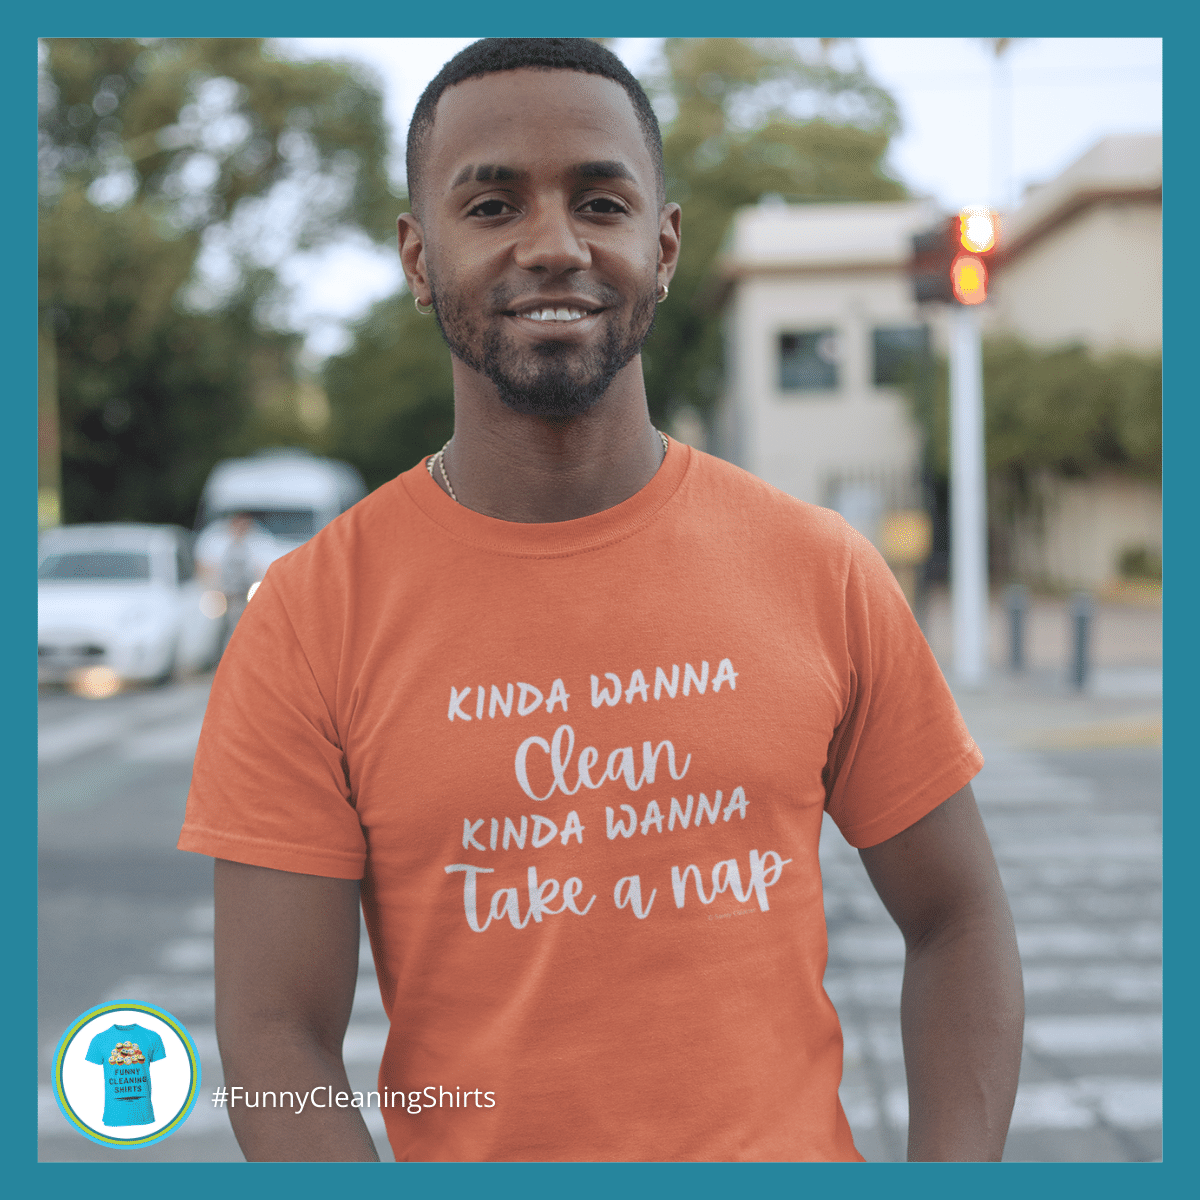 Kinda Wanna Clean Savvy Cleaner Funny Cleaning Shirts Standard Tee